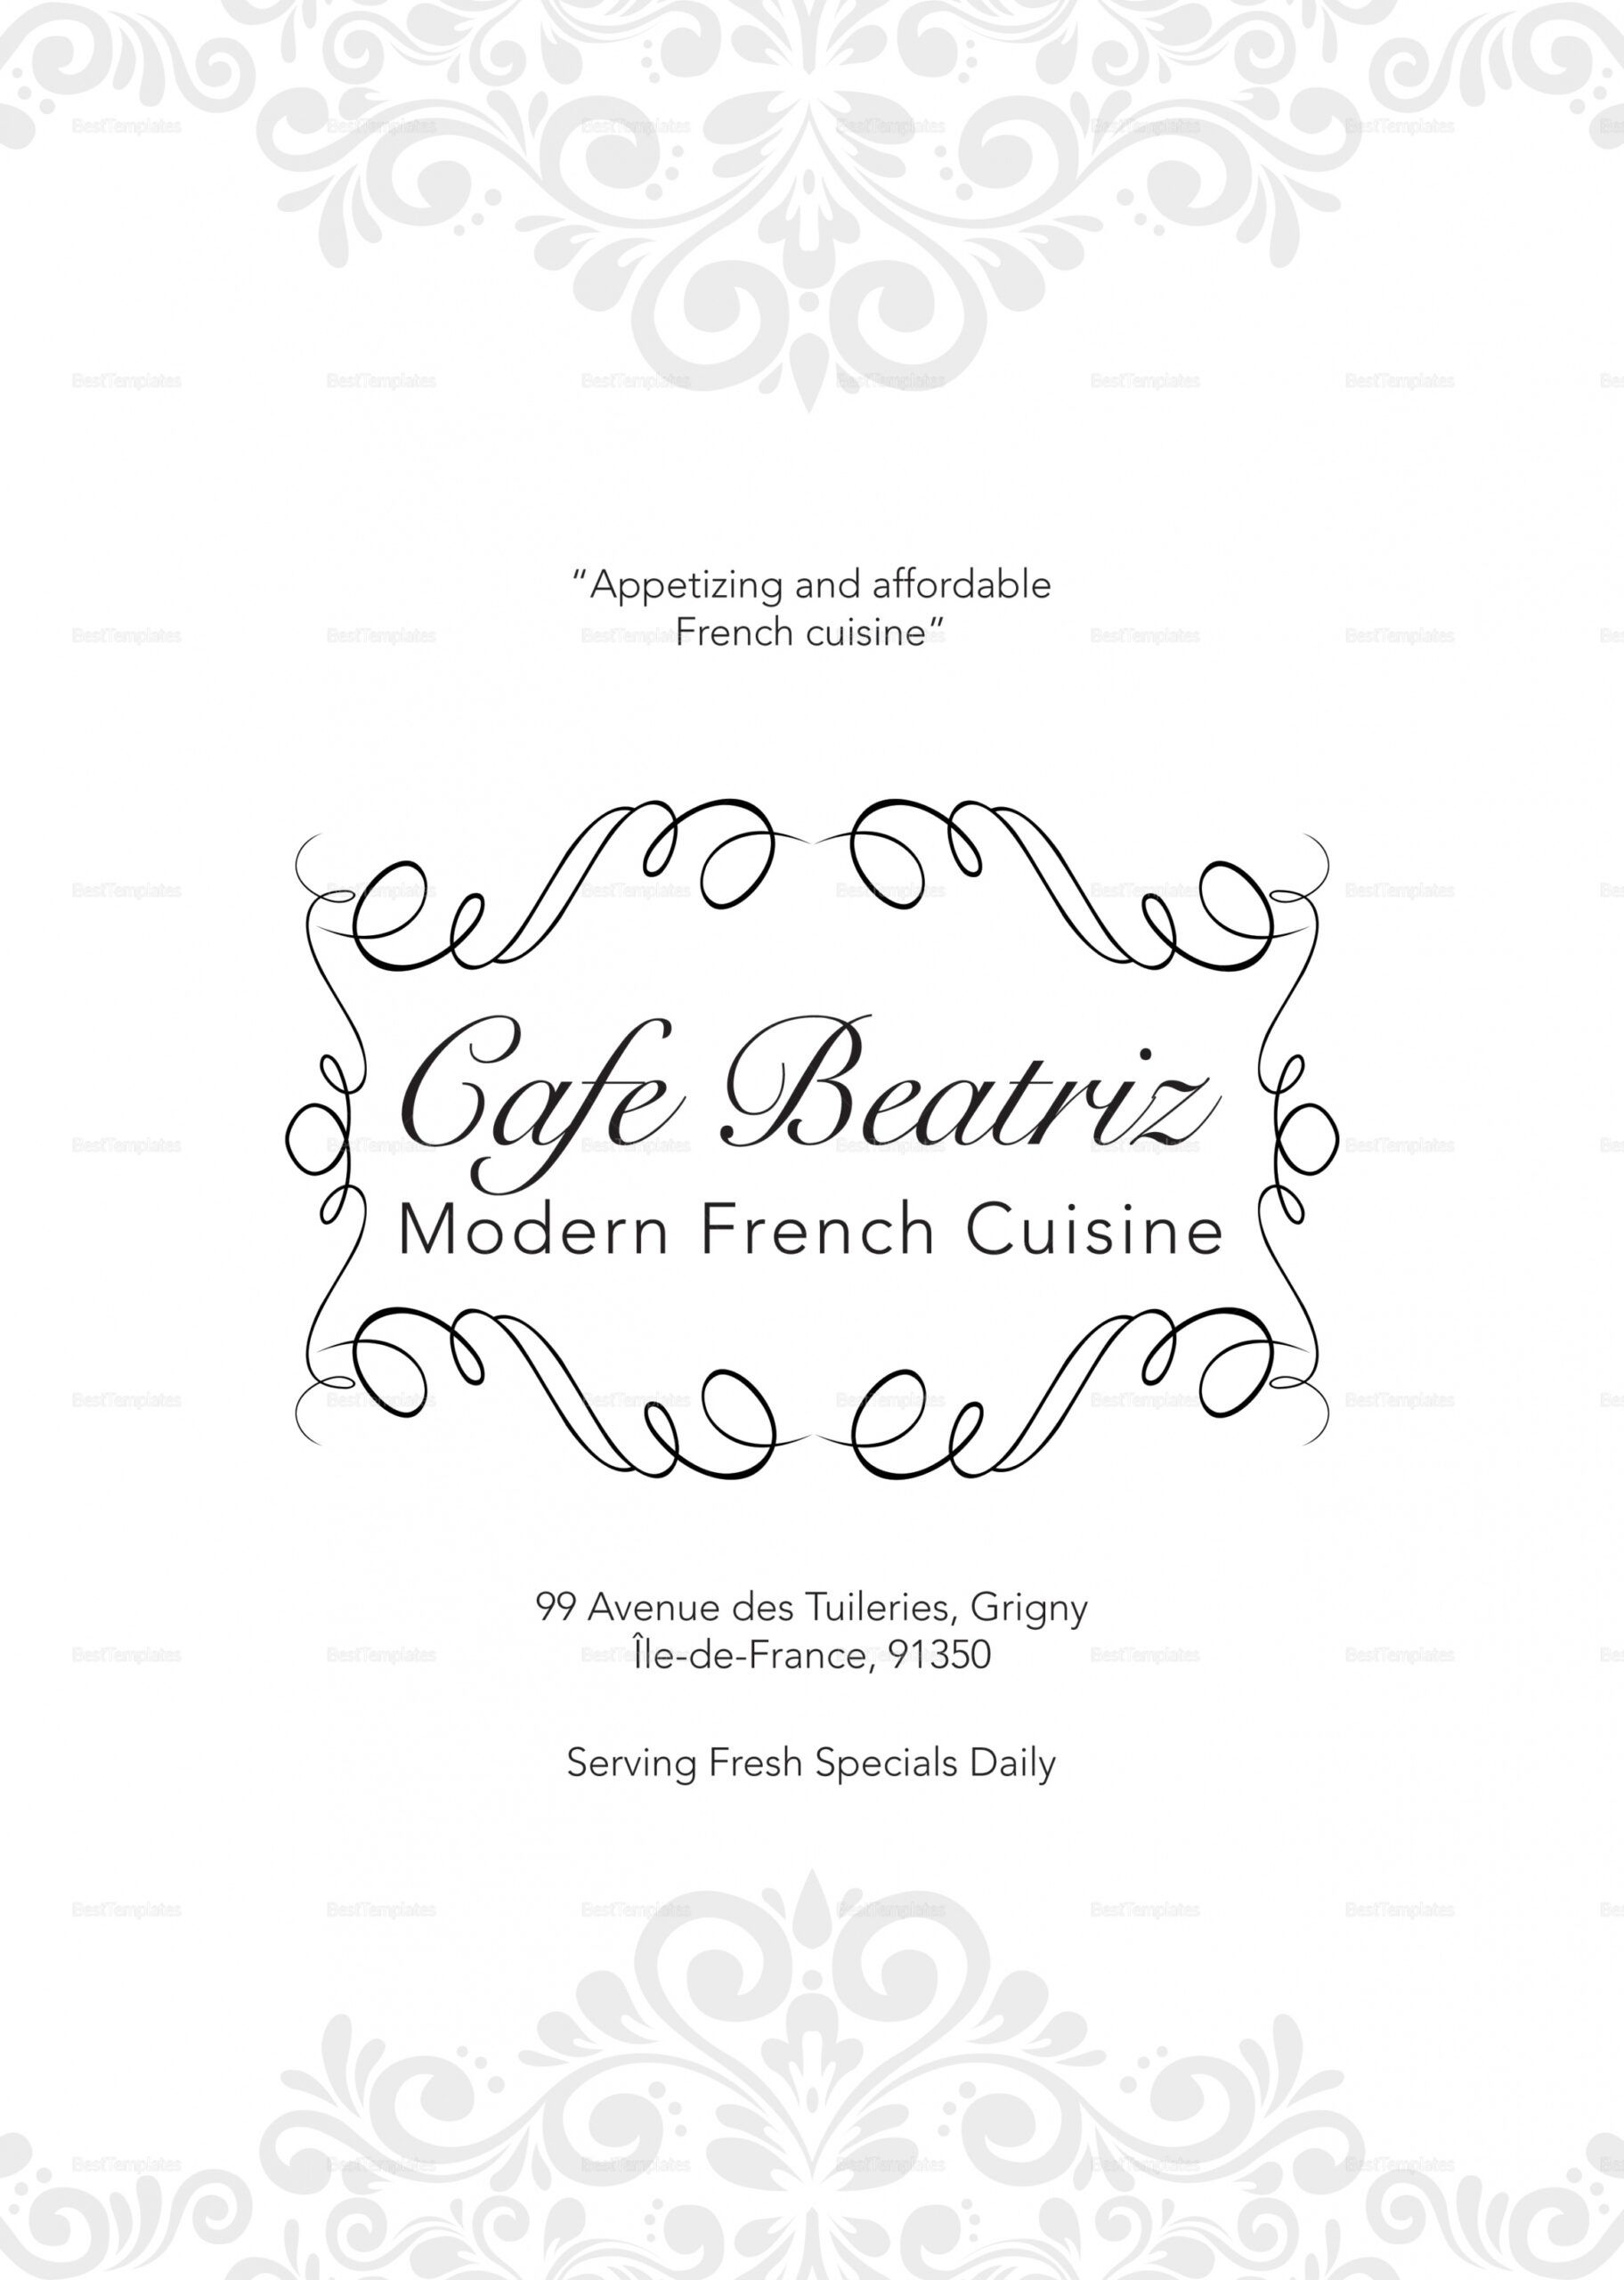 French Cafe Menu Template Excel Sample